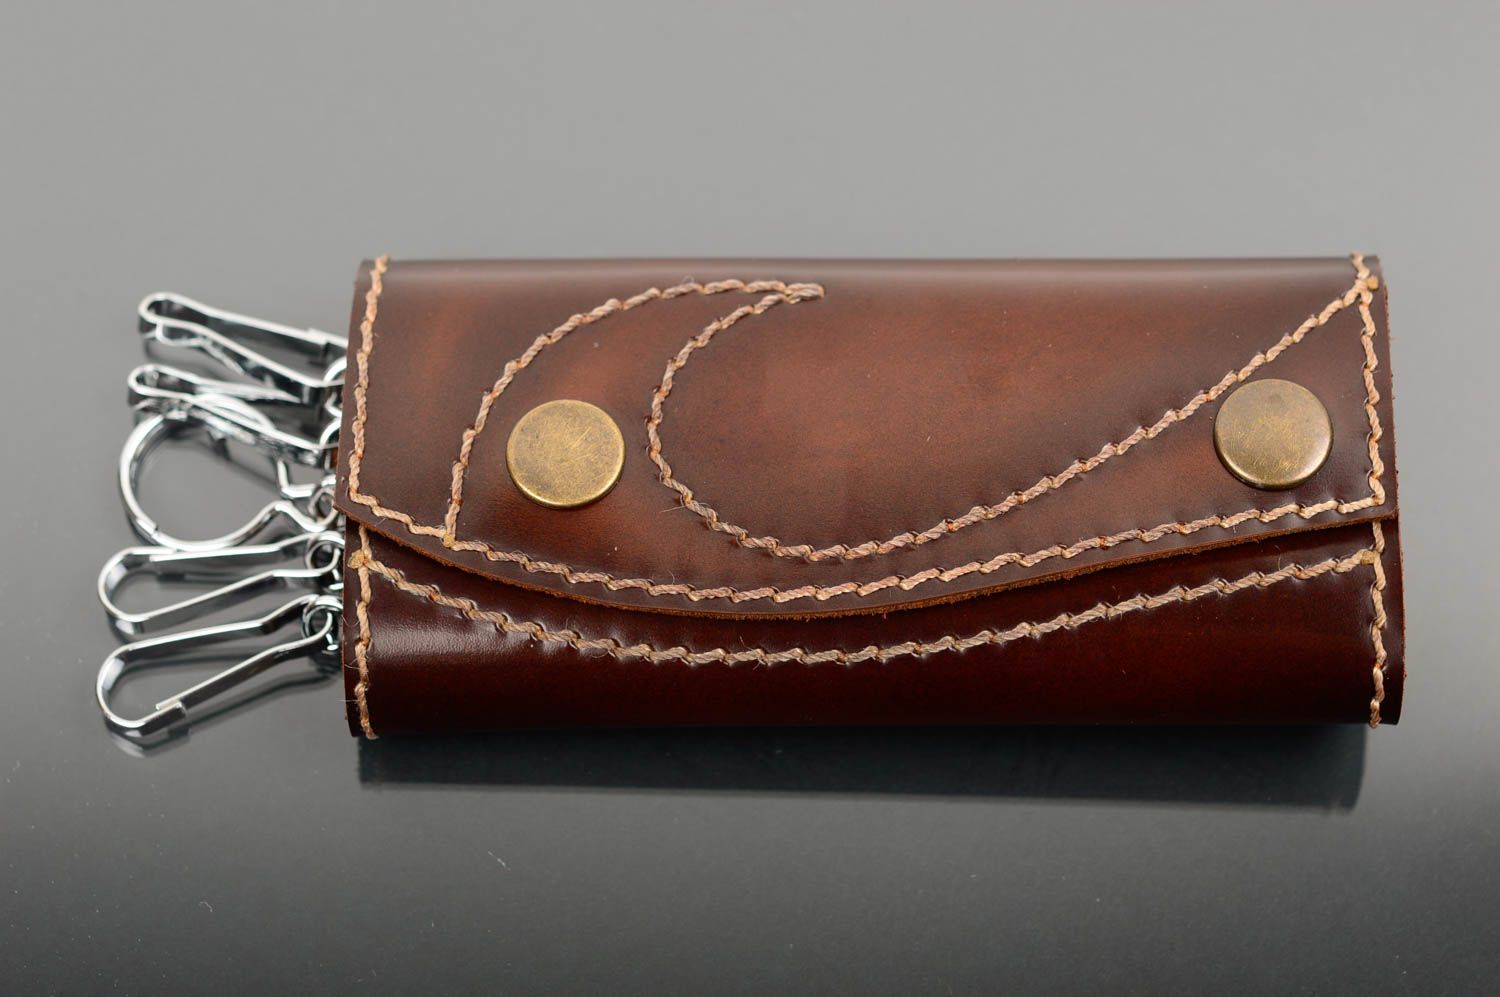 Beautiful handmade leather key case designs handcrafted accessory gift ideas photo 1